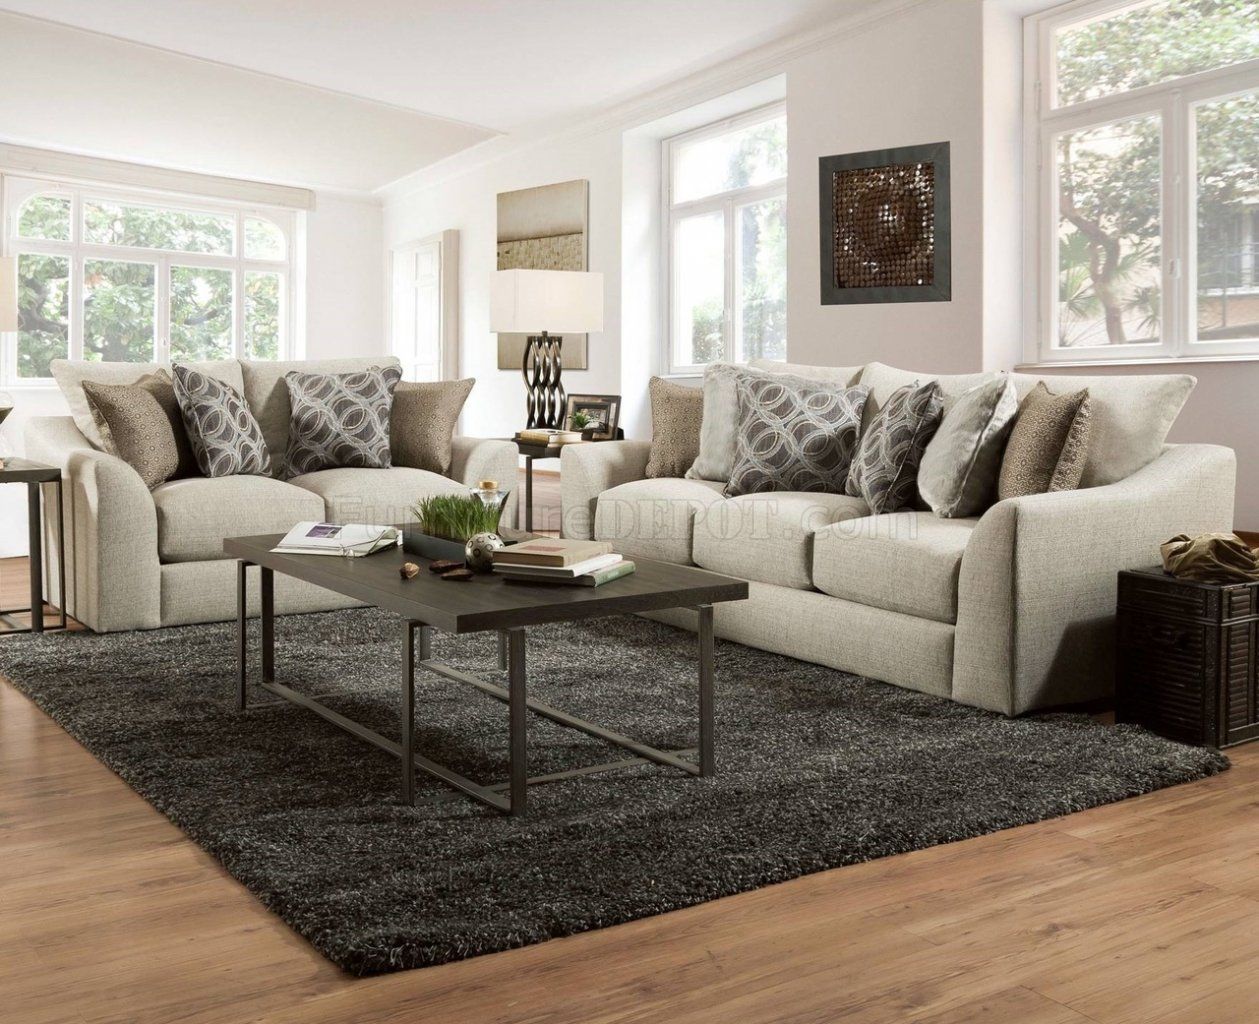 2 Piece Oversized Sofa & Loveseat Set In Espresso Micro Suede Inside 110" Oversized Sofas (View 11 of 15)